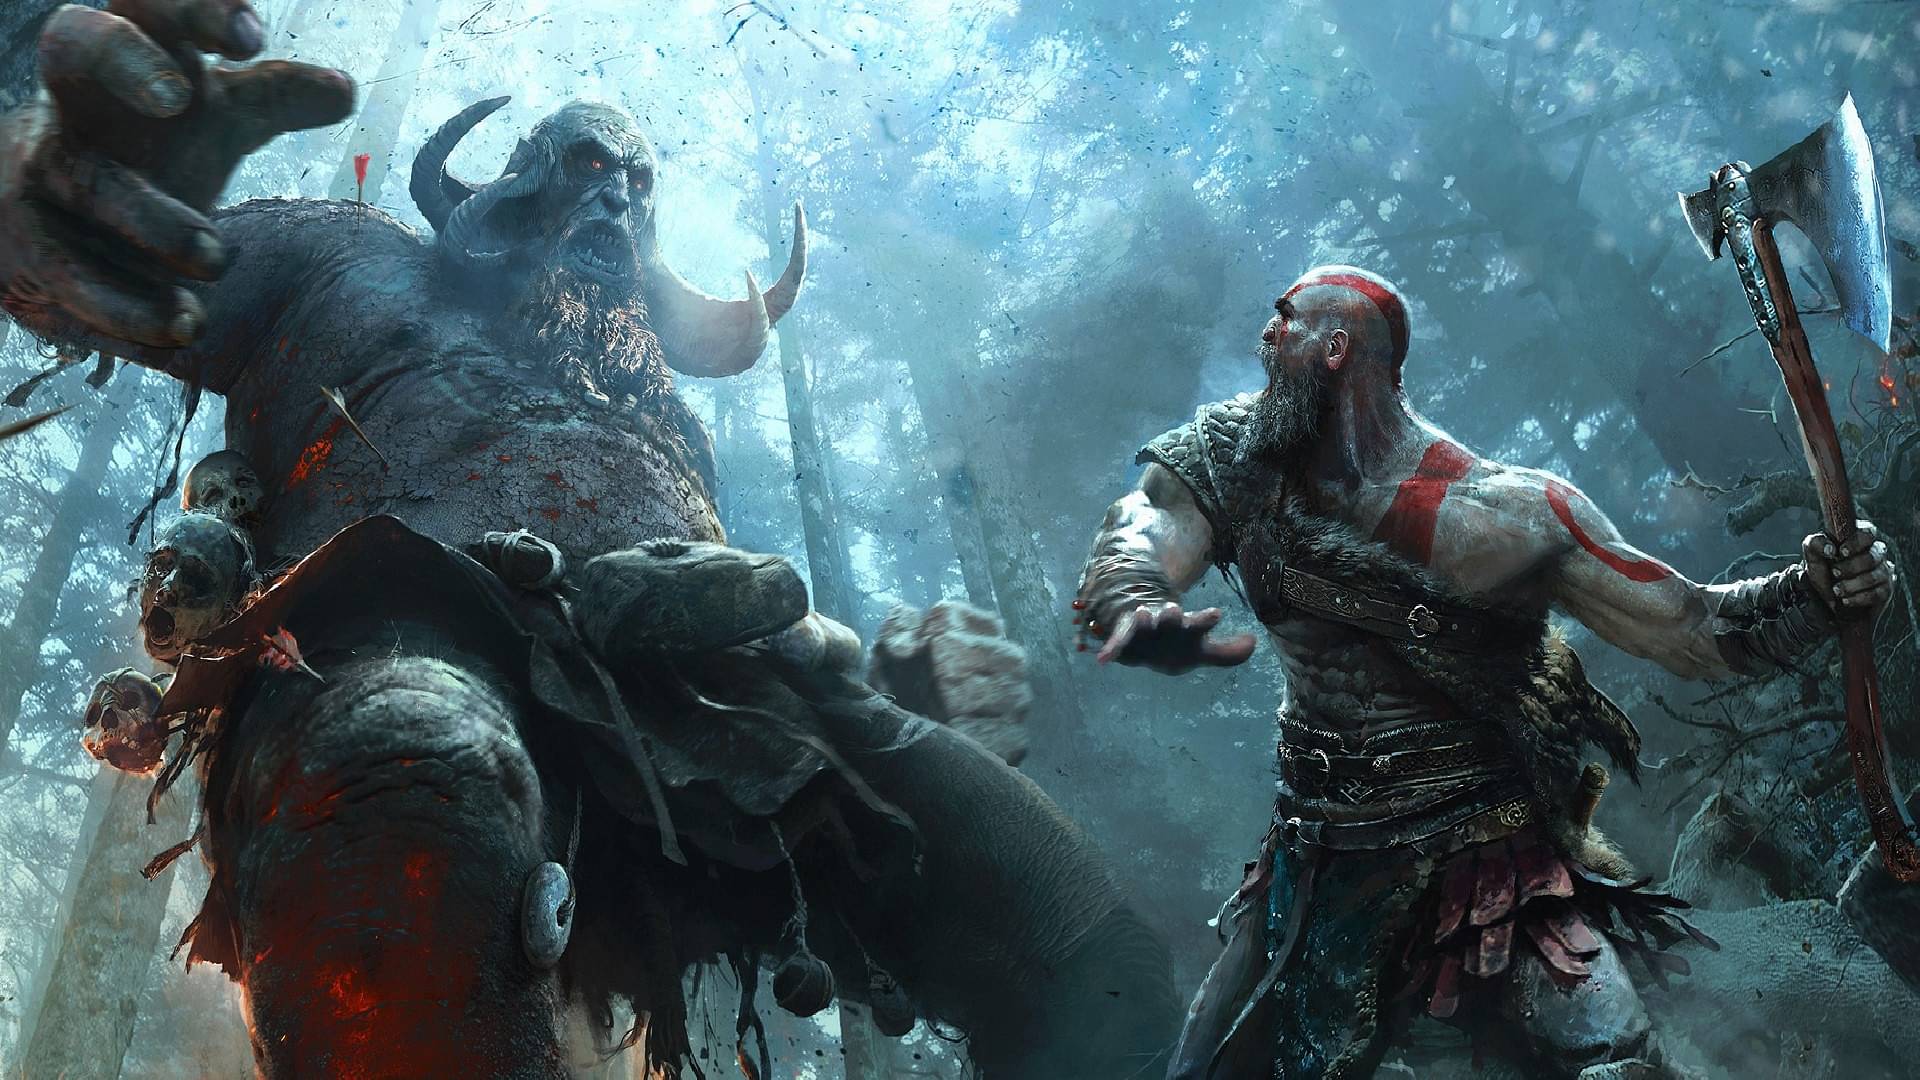 An image of Kratos fighting a troll in God of War